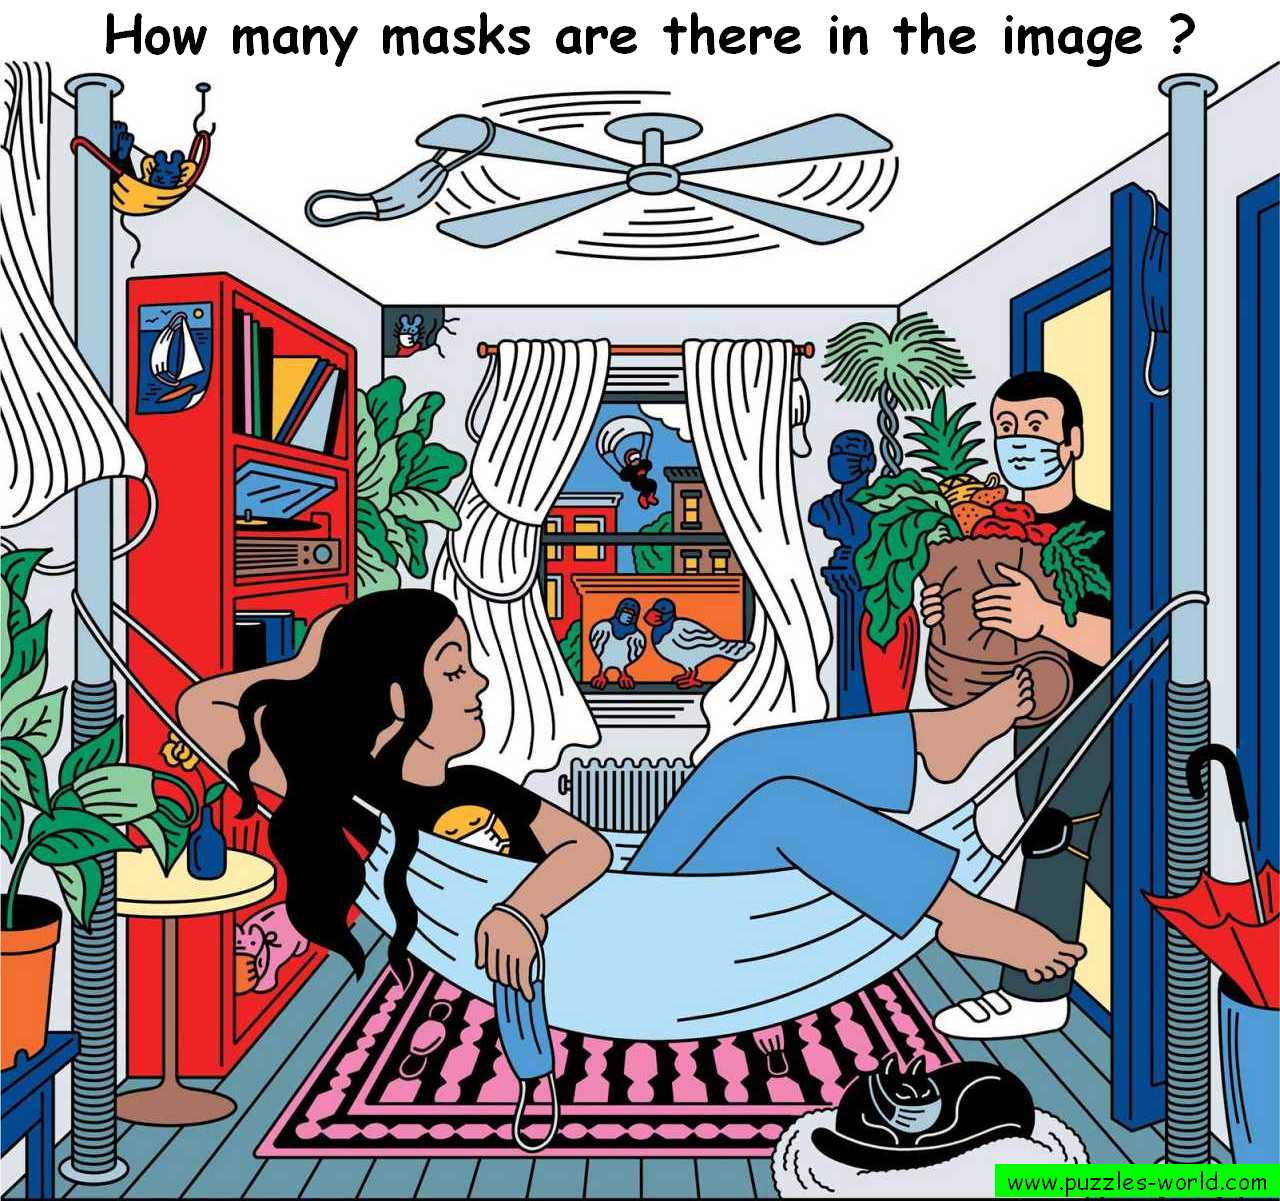 How many masks are there in the image ?